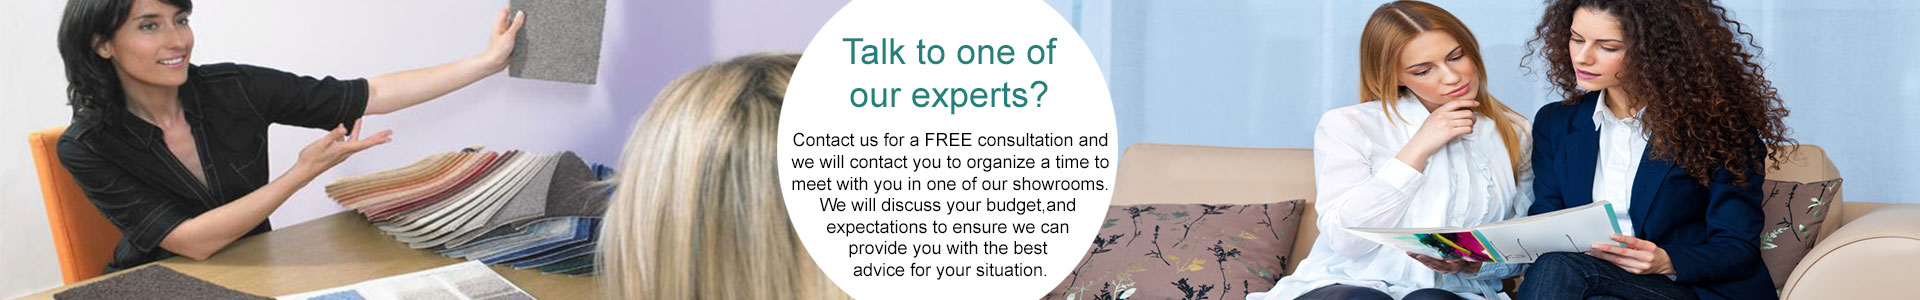 Talk to one of our experts